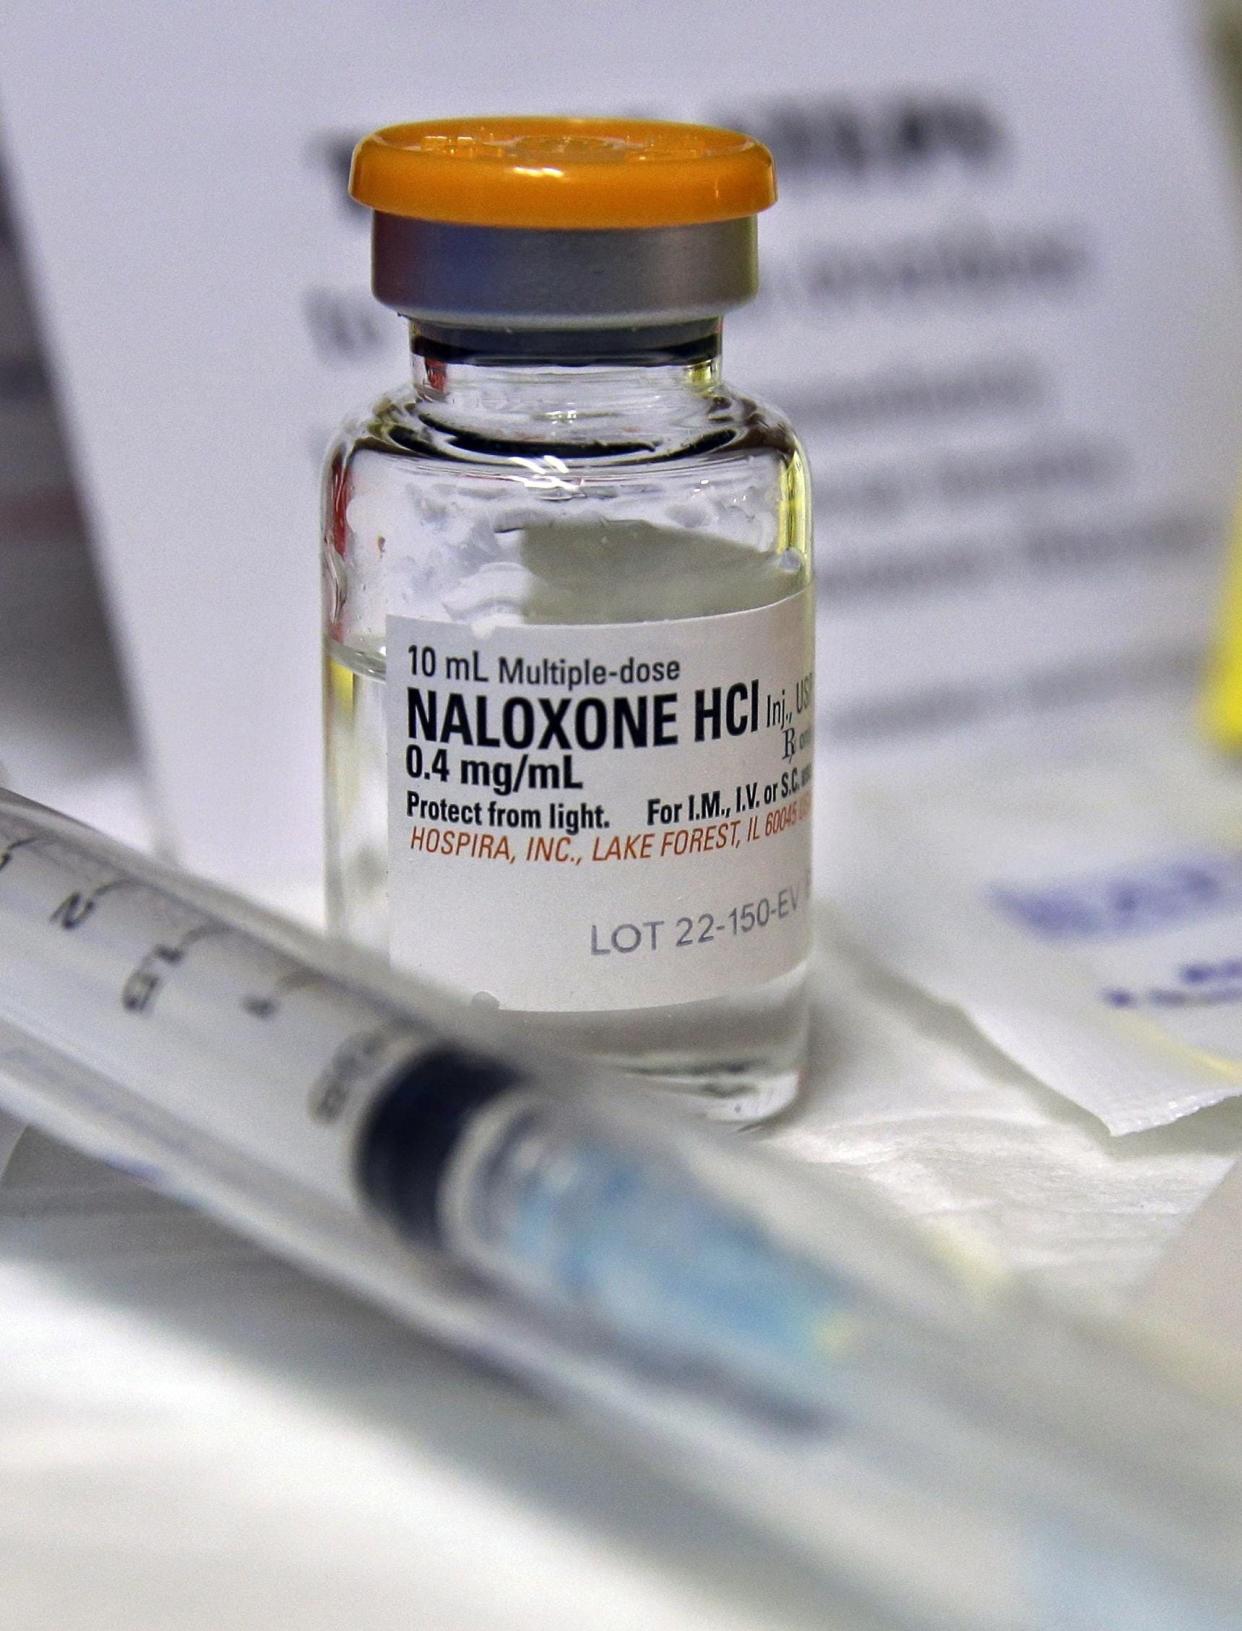 A small bottle of the opiate overdose treatment drug, naloxone, also known by its brand name Narcan, is displayed.